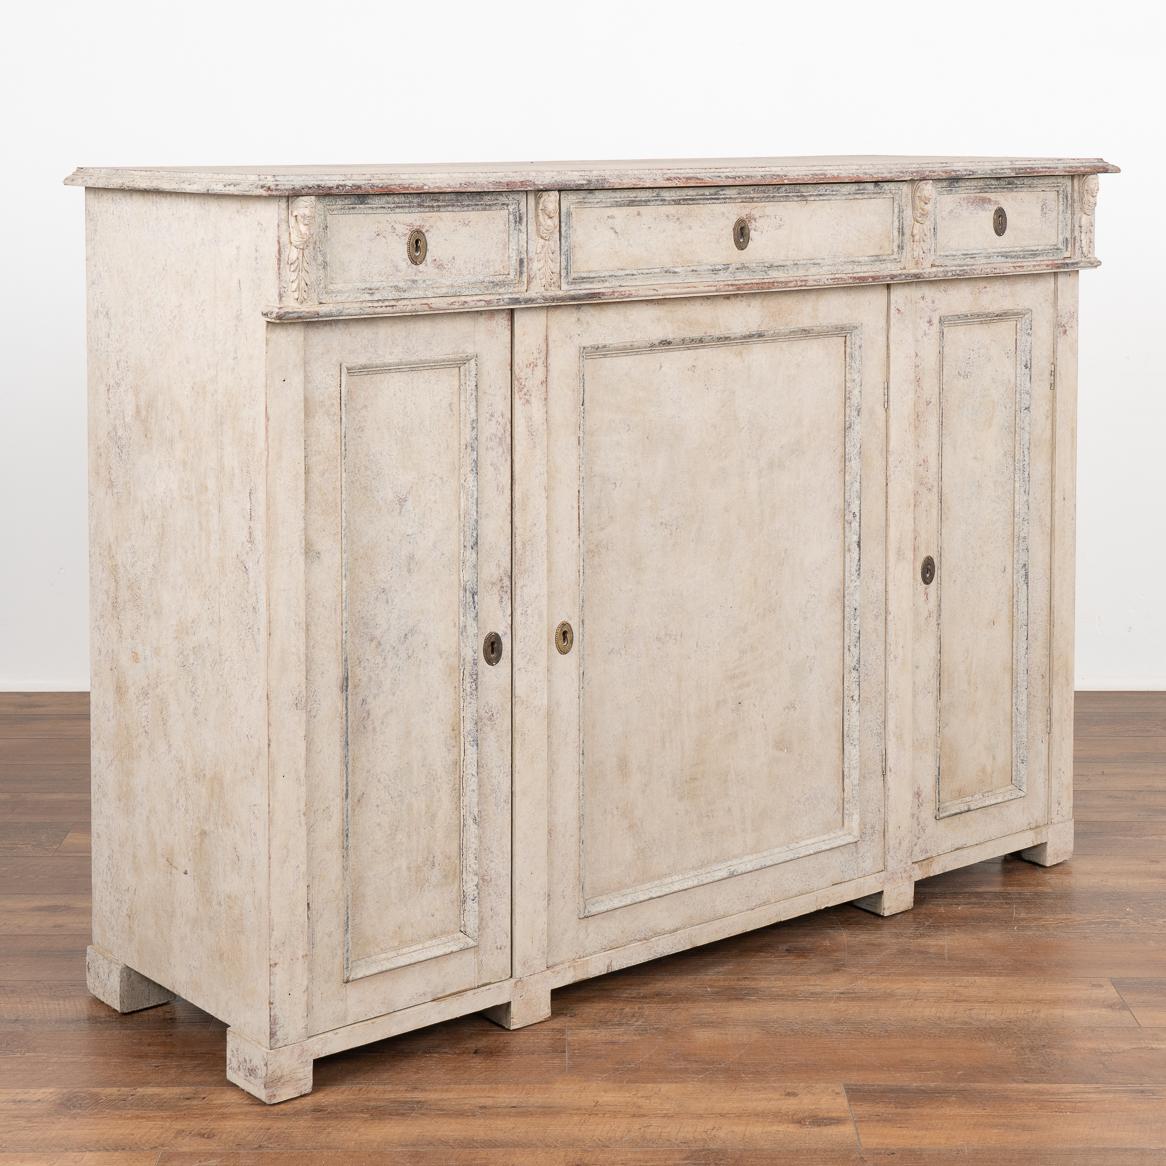 Gustavian gray painted tall pine sideboard with carved faces and acanthus leaves accenting the upper corners. 
Newer, professionally applied layered gray painted finish with plum undertones and muted blue/black accent around panel doors and drawers.